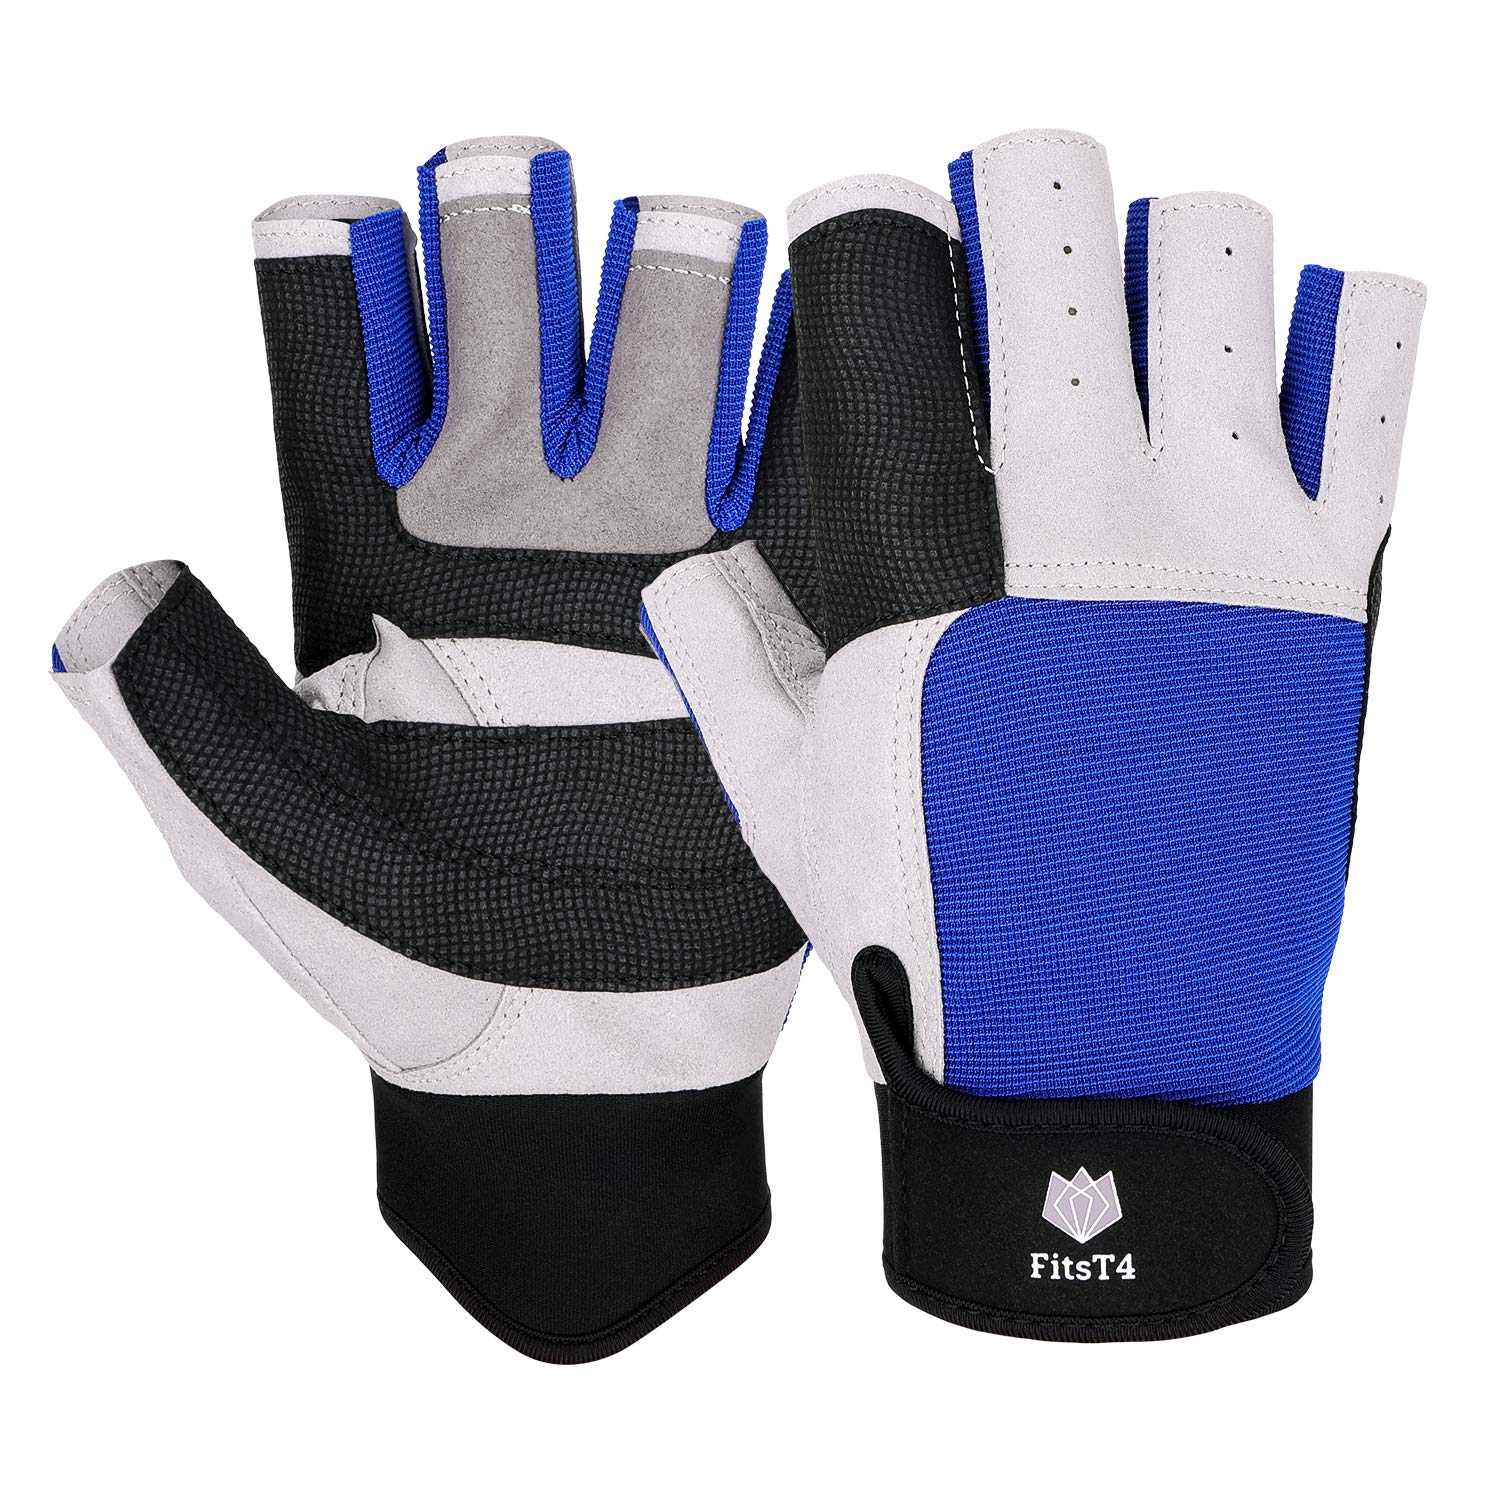 Sailing Gloves Deckhand Glove Yachting Canoe Kayak Dinghy Rope WaterSki Cut  Finger Blue / Gray XL